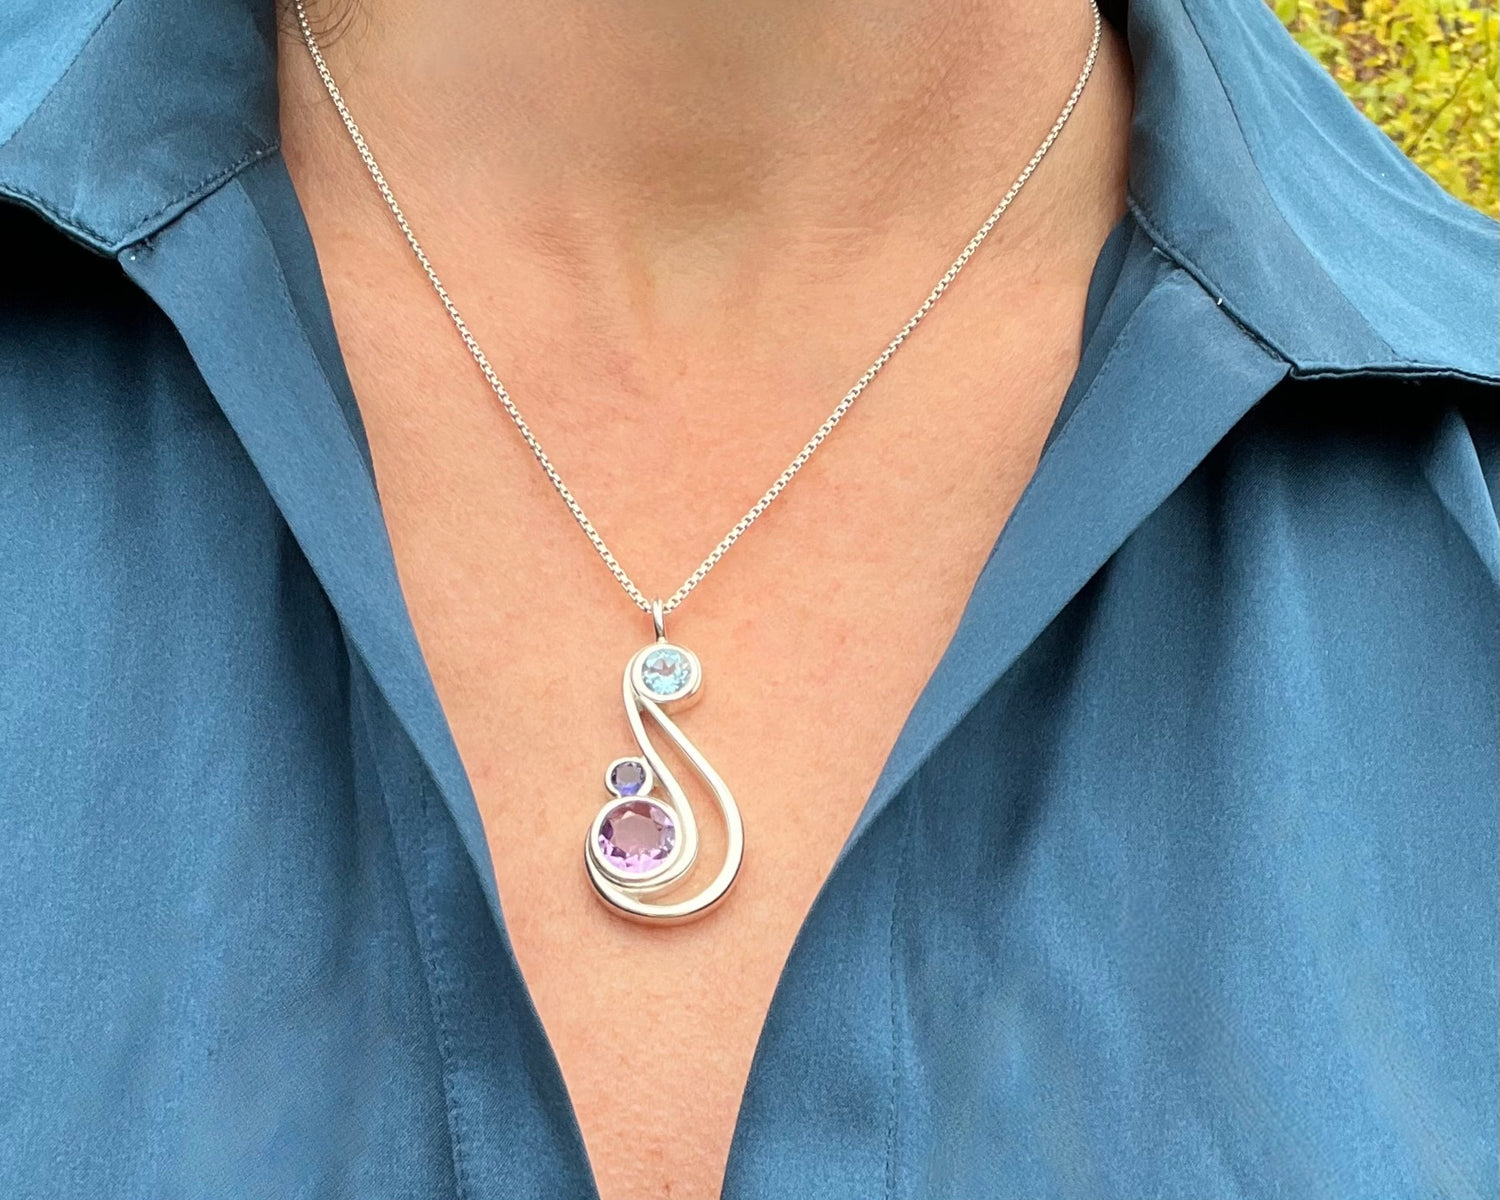 wearing Aria pendant in Iolite, Amethyst and Sky Blue Topaz 18" by Hannah Daye & Co